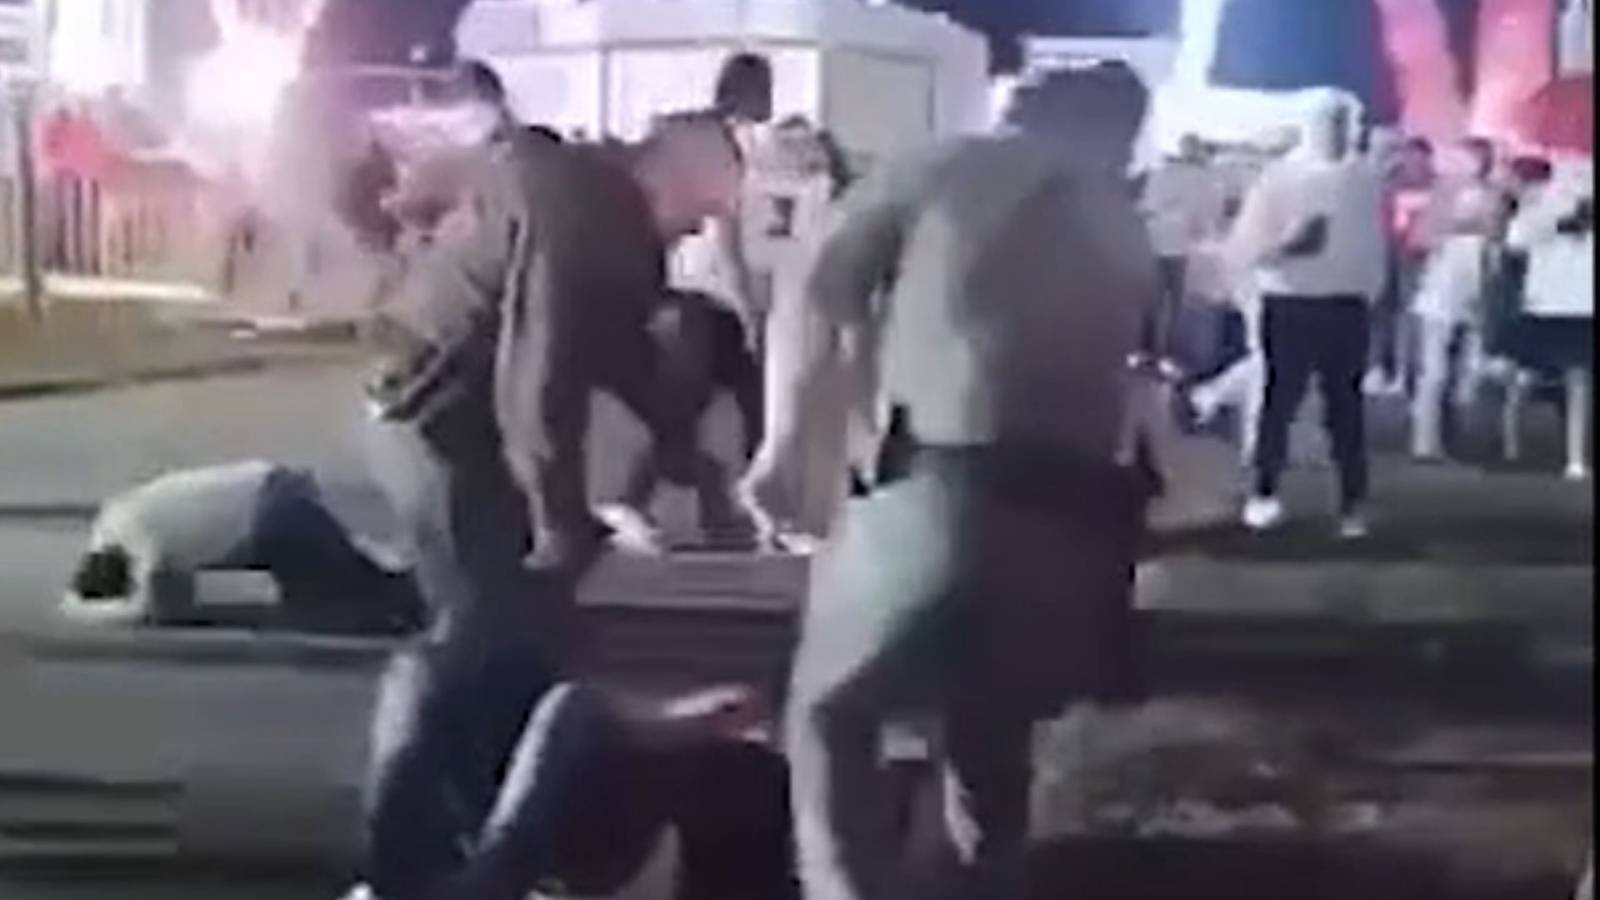 Chaos, violent fights break out at Coweta fair, leading to 4 arrests